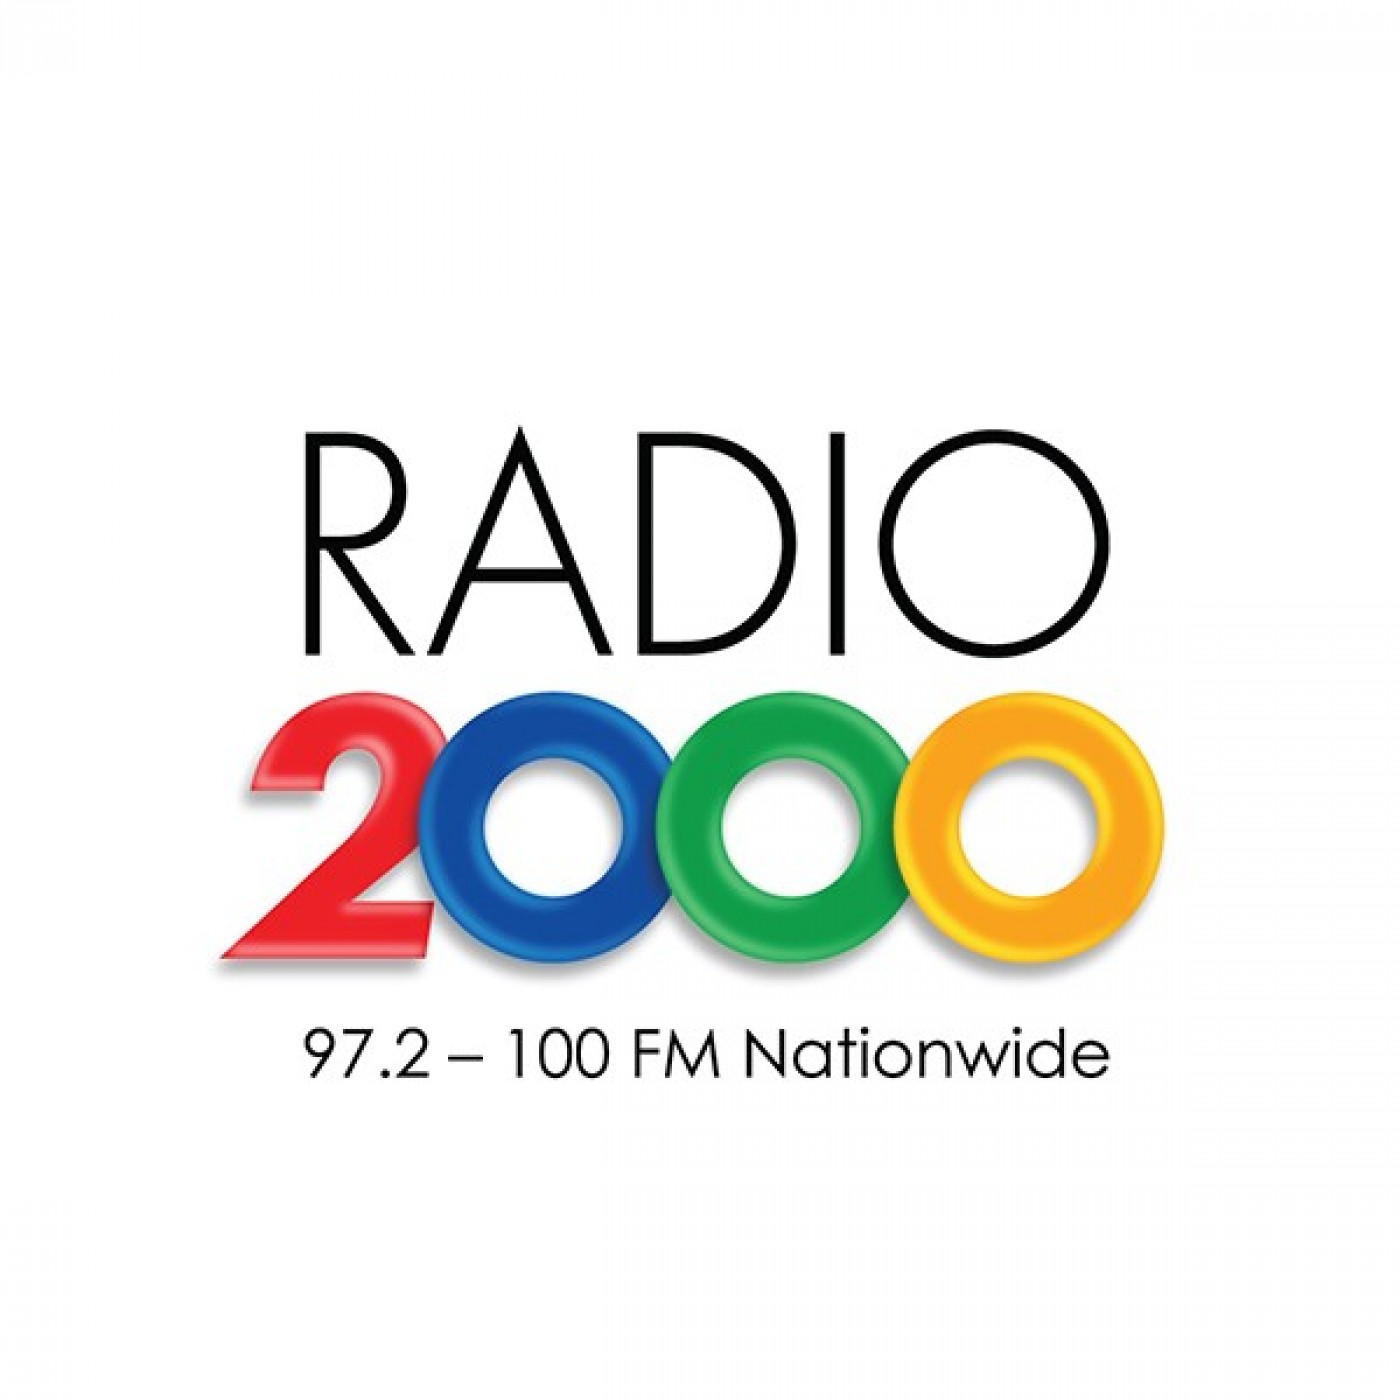 RADIO 2000 IN THE MIX DEEP HOUSE MIXED BY DARKHORSE 29-05-2020 22H20-22H40